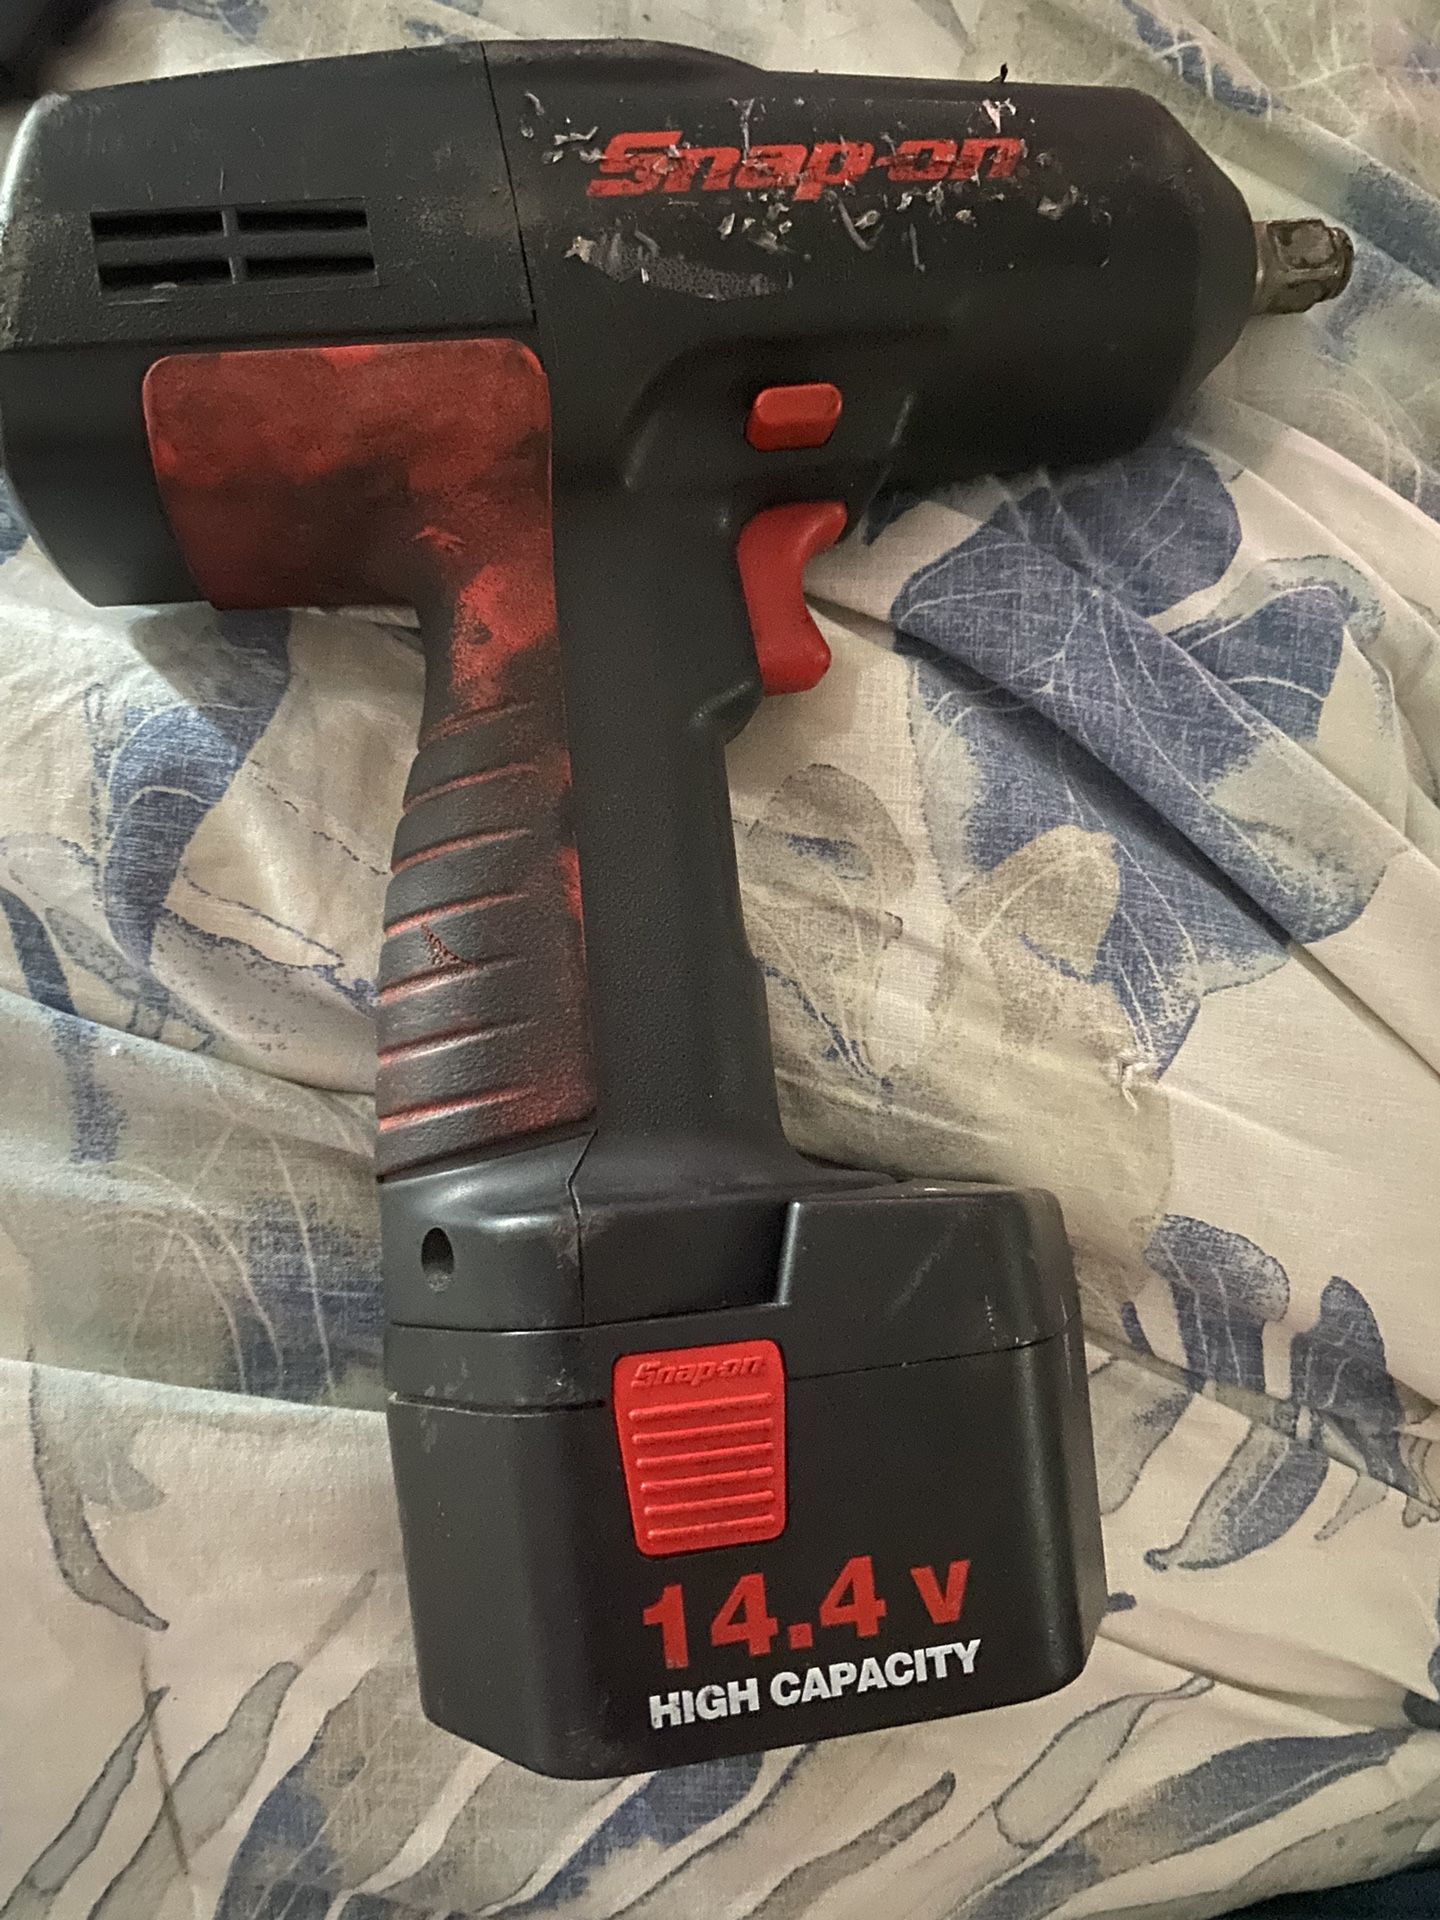 Snap-on 1/2” Cordless Impact Wrench 